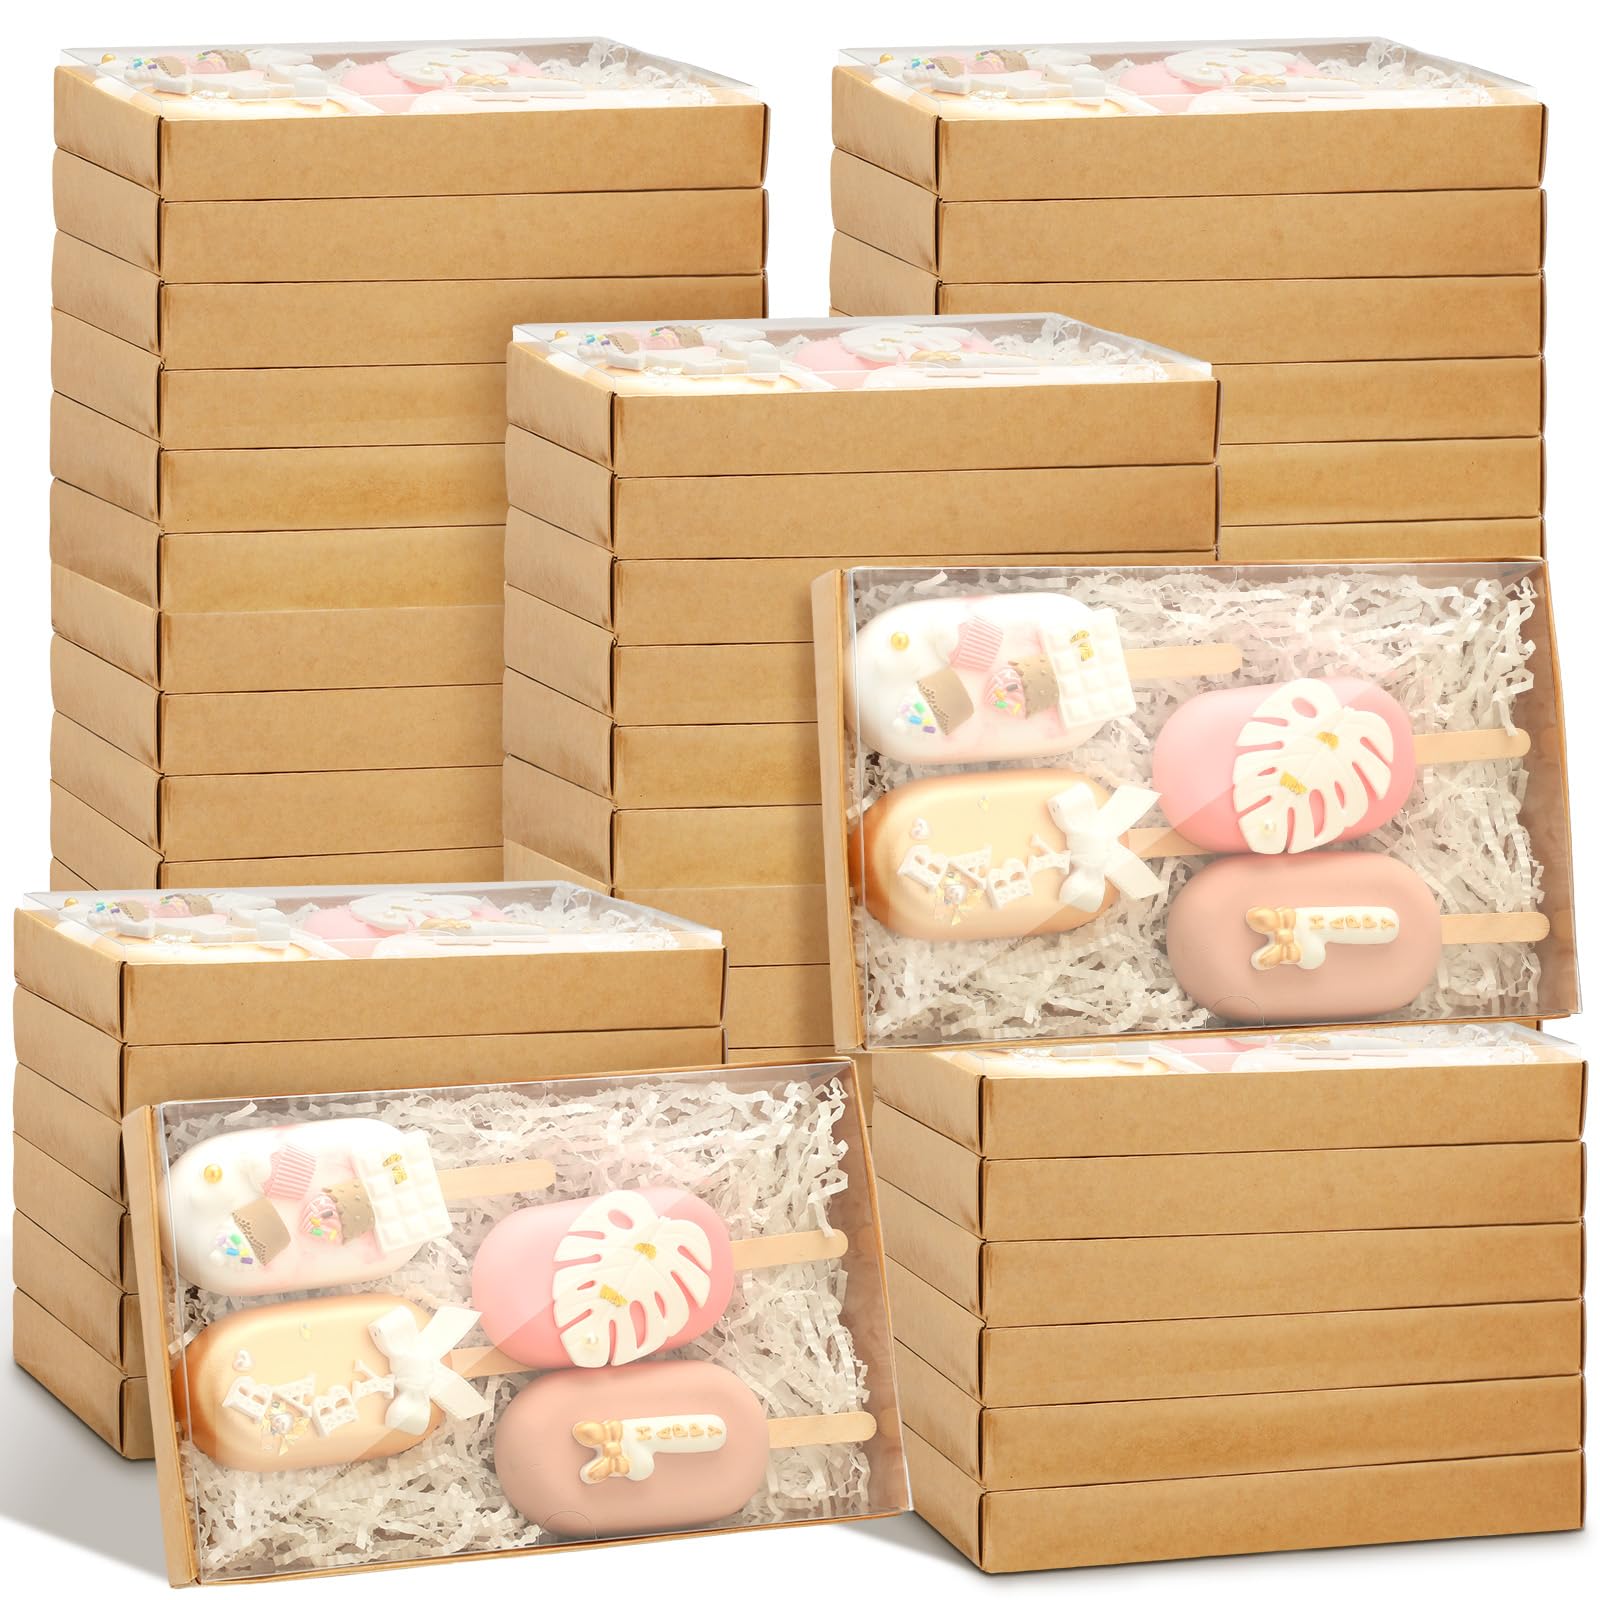 Karenhi 48 Pcs Clear Cookie Boxes with Full Window 9.5 x 5.9 x 1.3 in Bakery Treat Boxes Macaron Chocolate Donuts Pastry Clear Lids Packing Boxes for Mother's Day Wedding Grad Party(Brown)